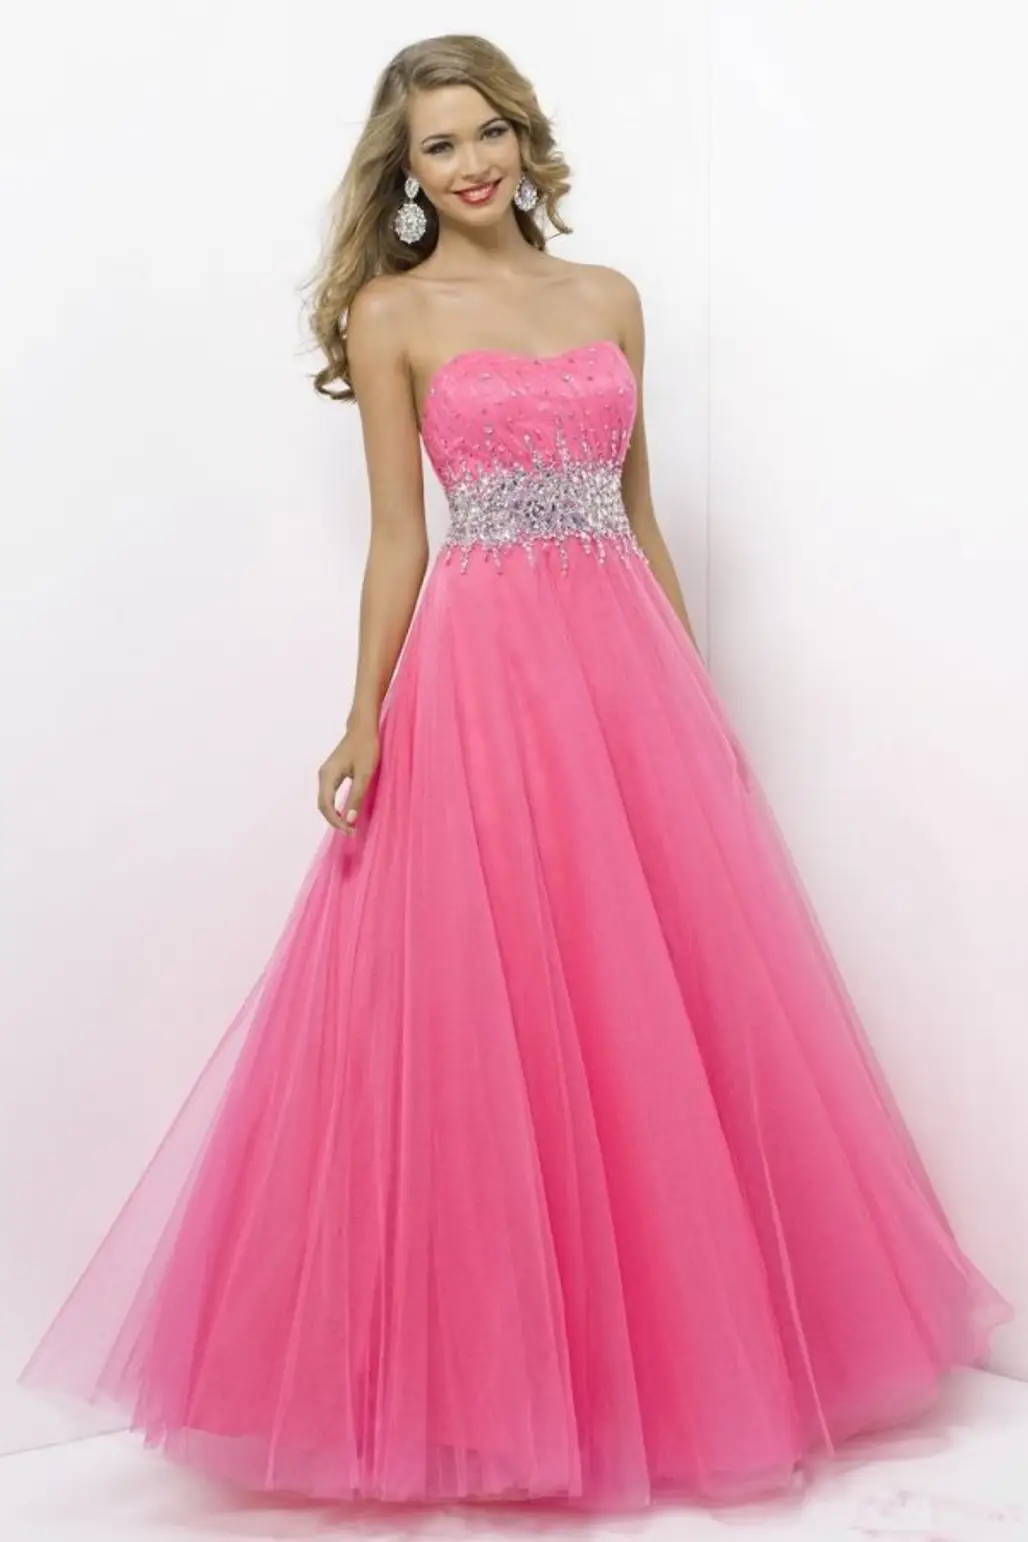 pink,dress,clothing,bridal party dress,gown,